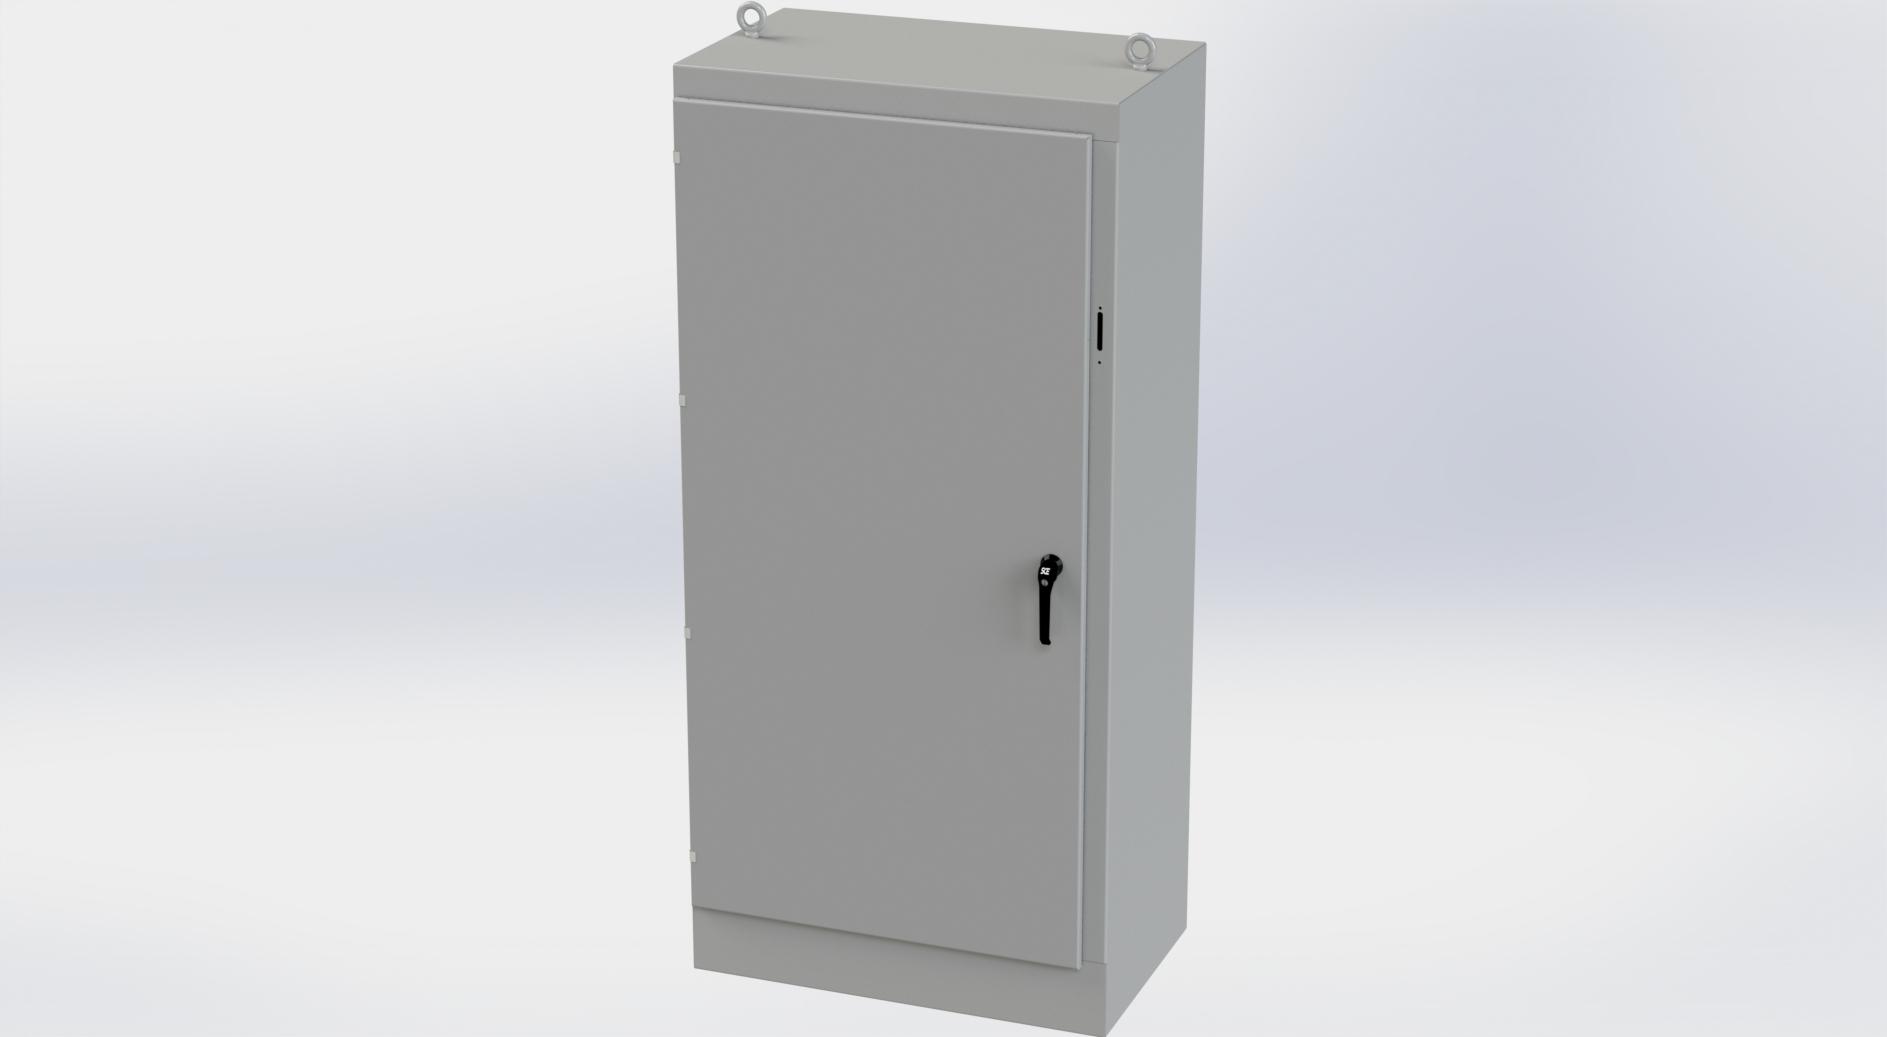 Saginaw Control SCE-84XM4024 1DR XM Enclosure, Height:84.00", Width:39.50", Depth:24.00", ANSI-61 gray powder coating inside and out. Sub-panels are powder coated white.  